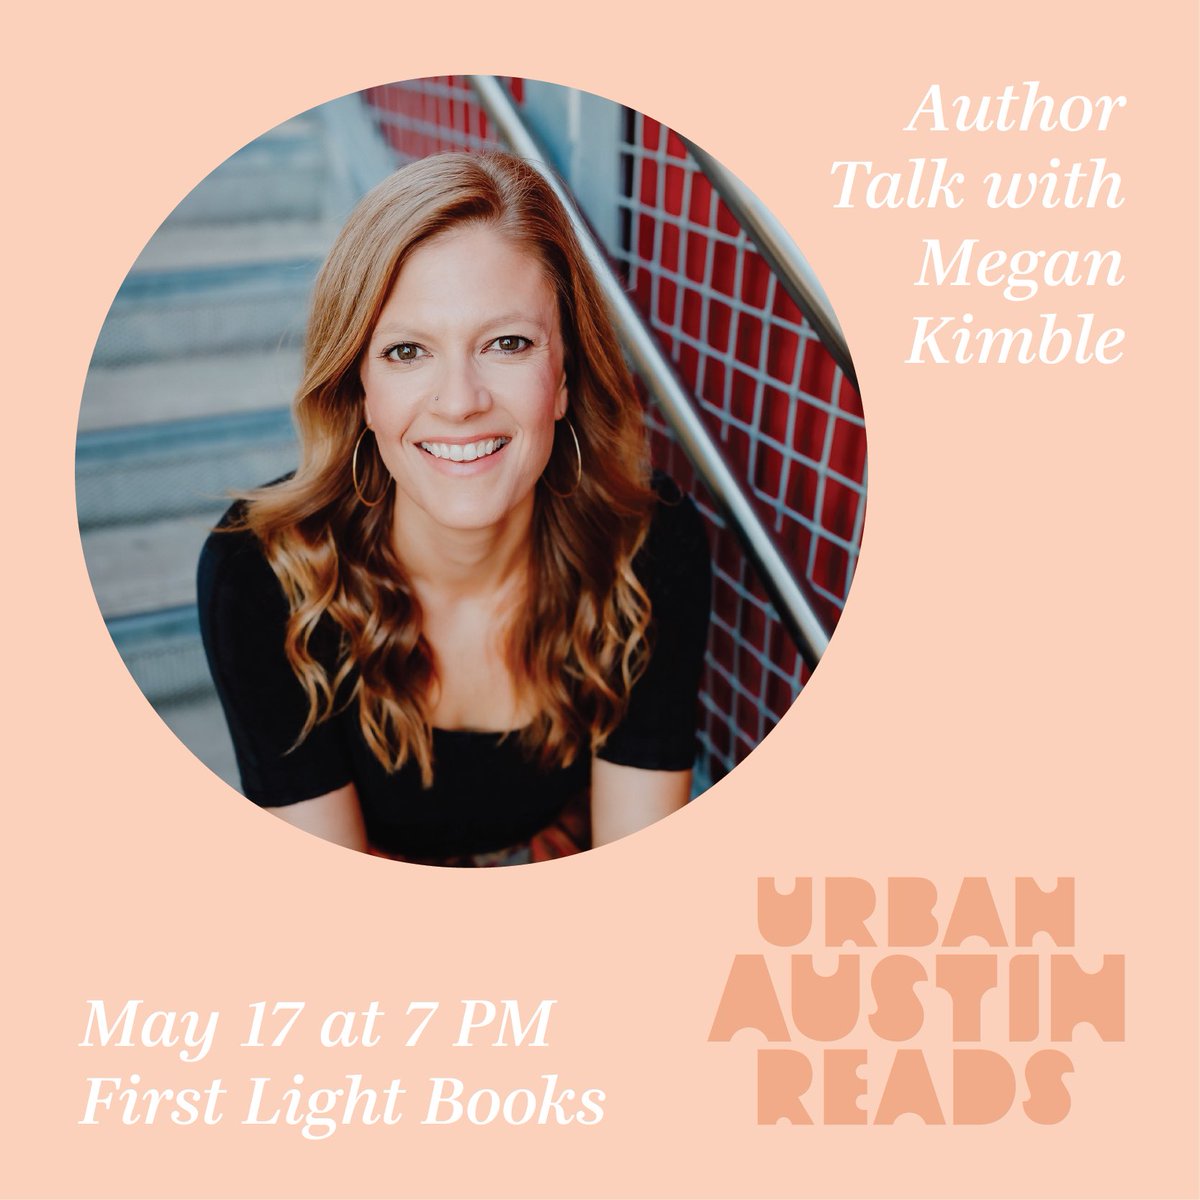 We are so excited for our event with @megankimble this Friday! Join us at 7 PM at First Light Books in Hyde Park.